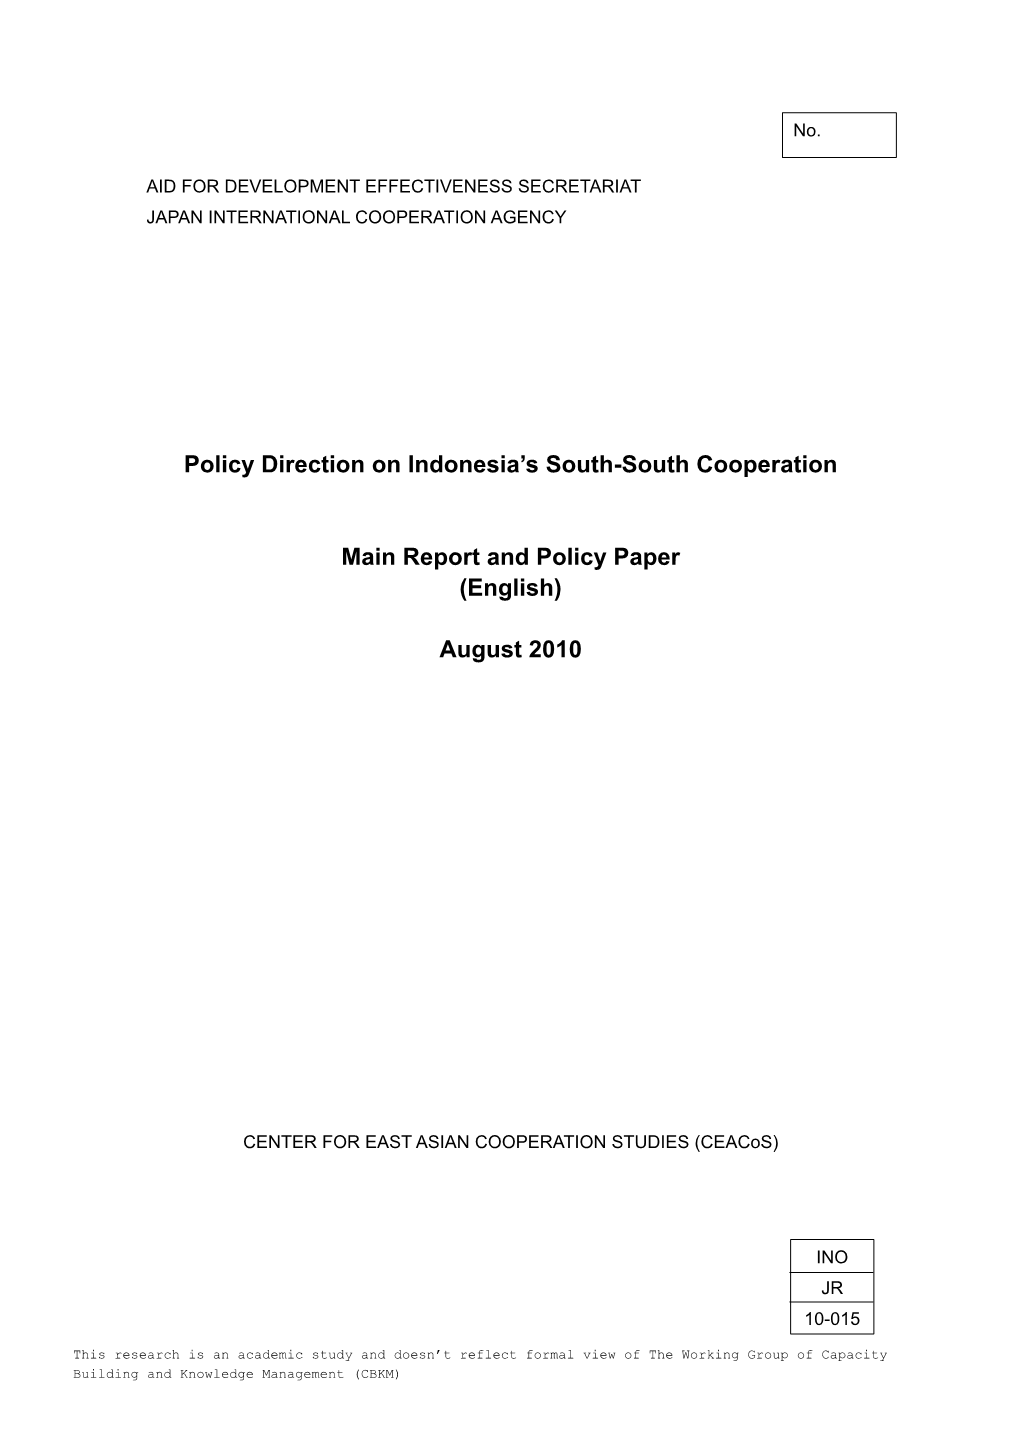 Policy Direction on Indonesia's South-South Cooperation Main